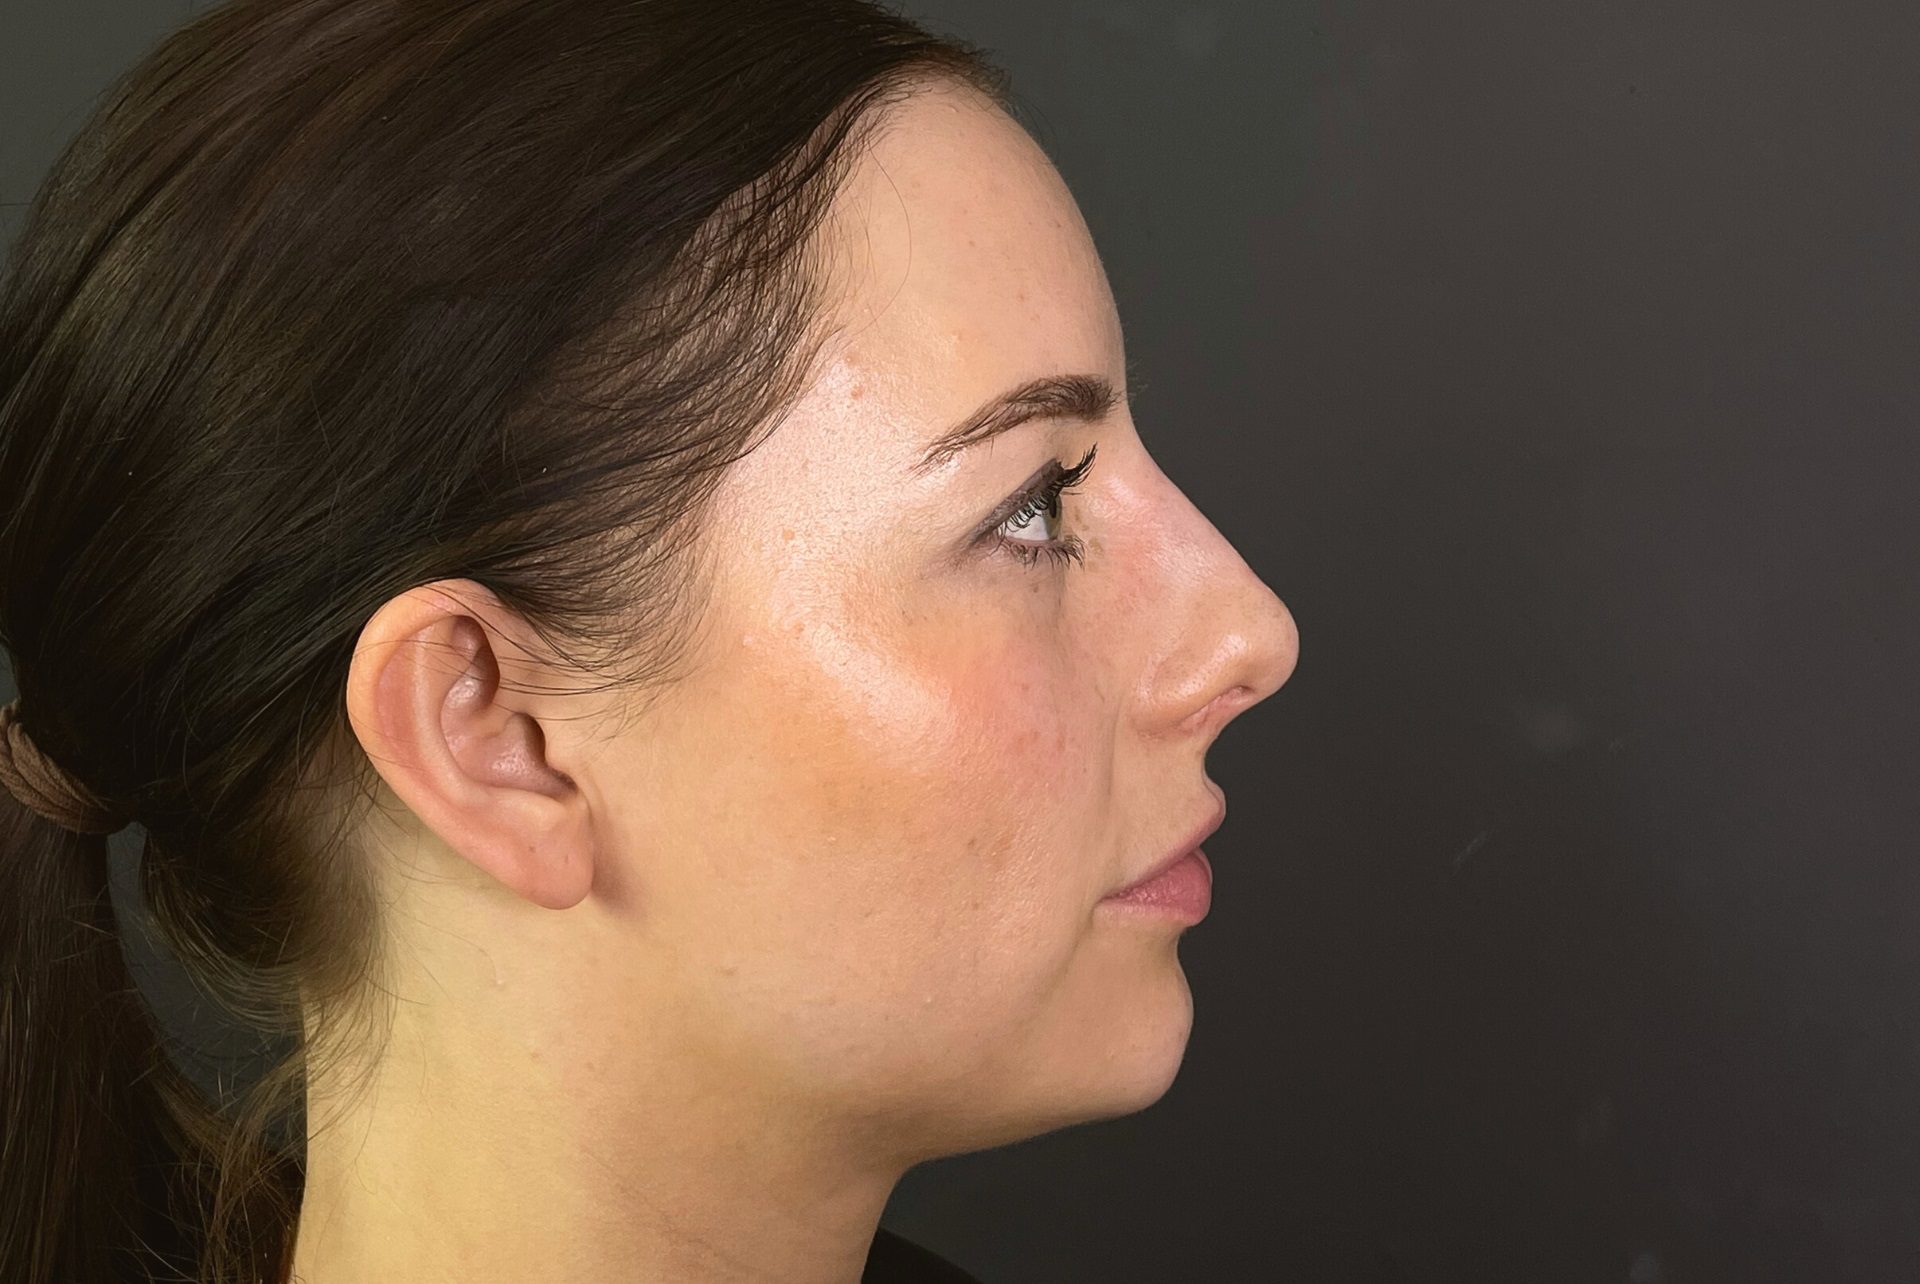 Non-surgical Rhinoplasty After, misshapen nose filler